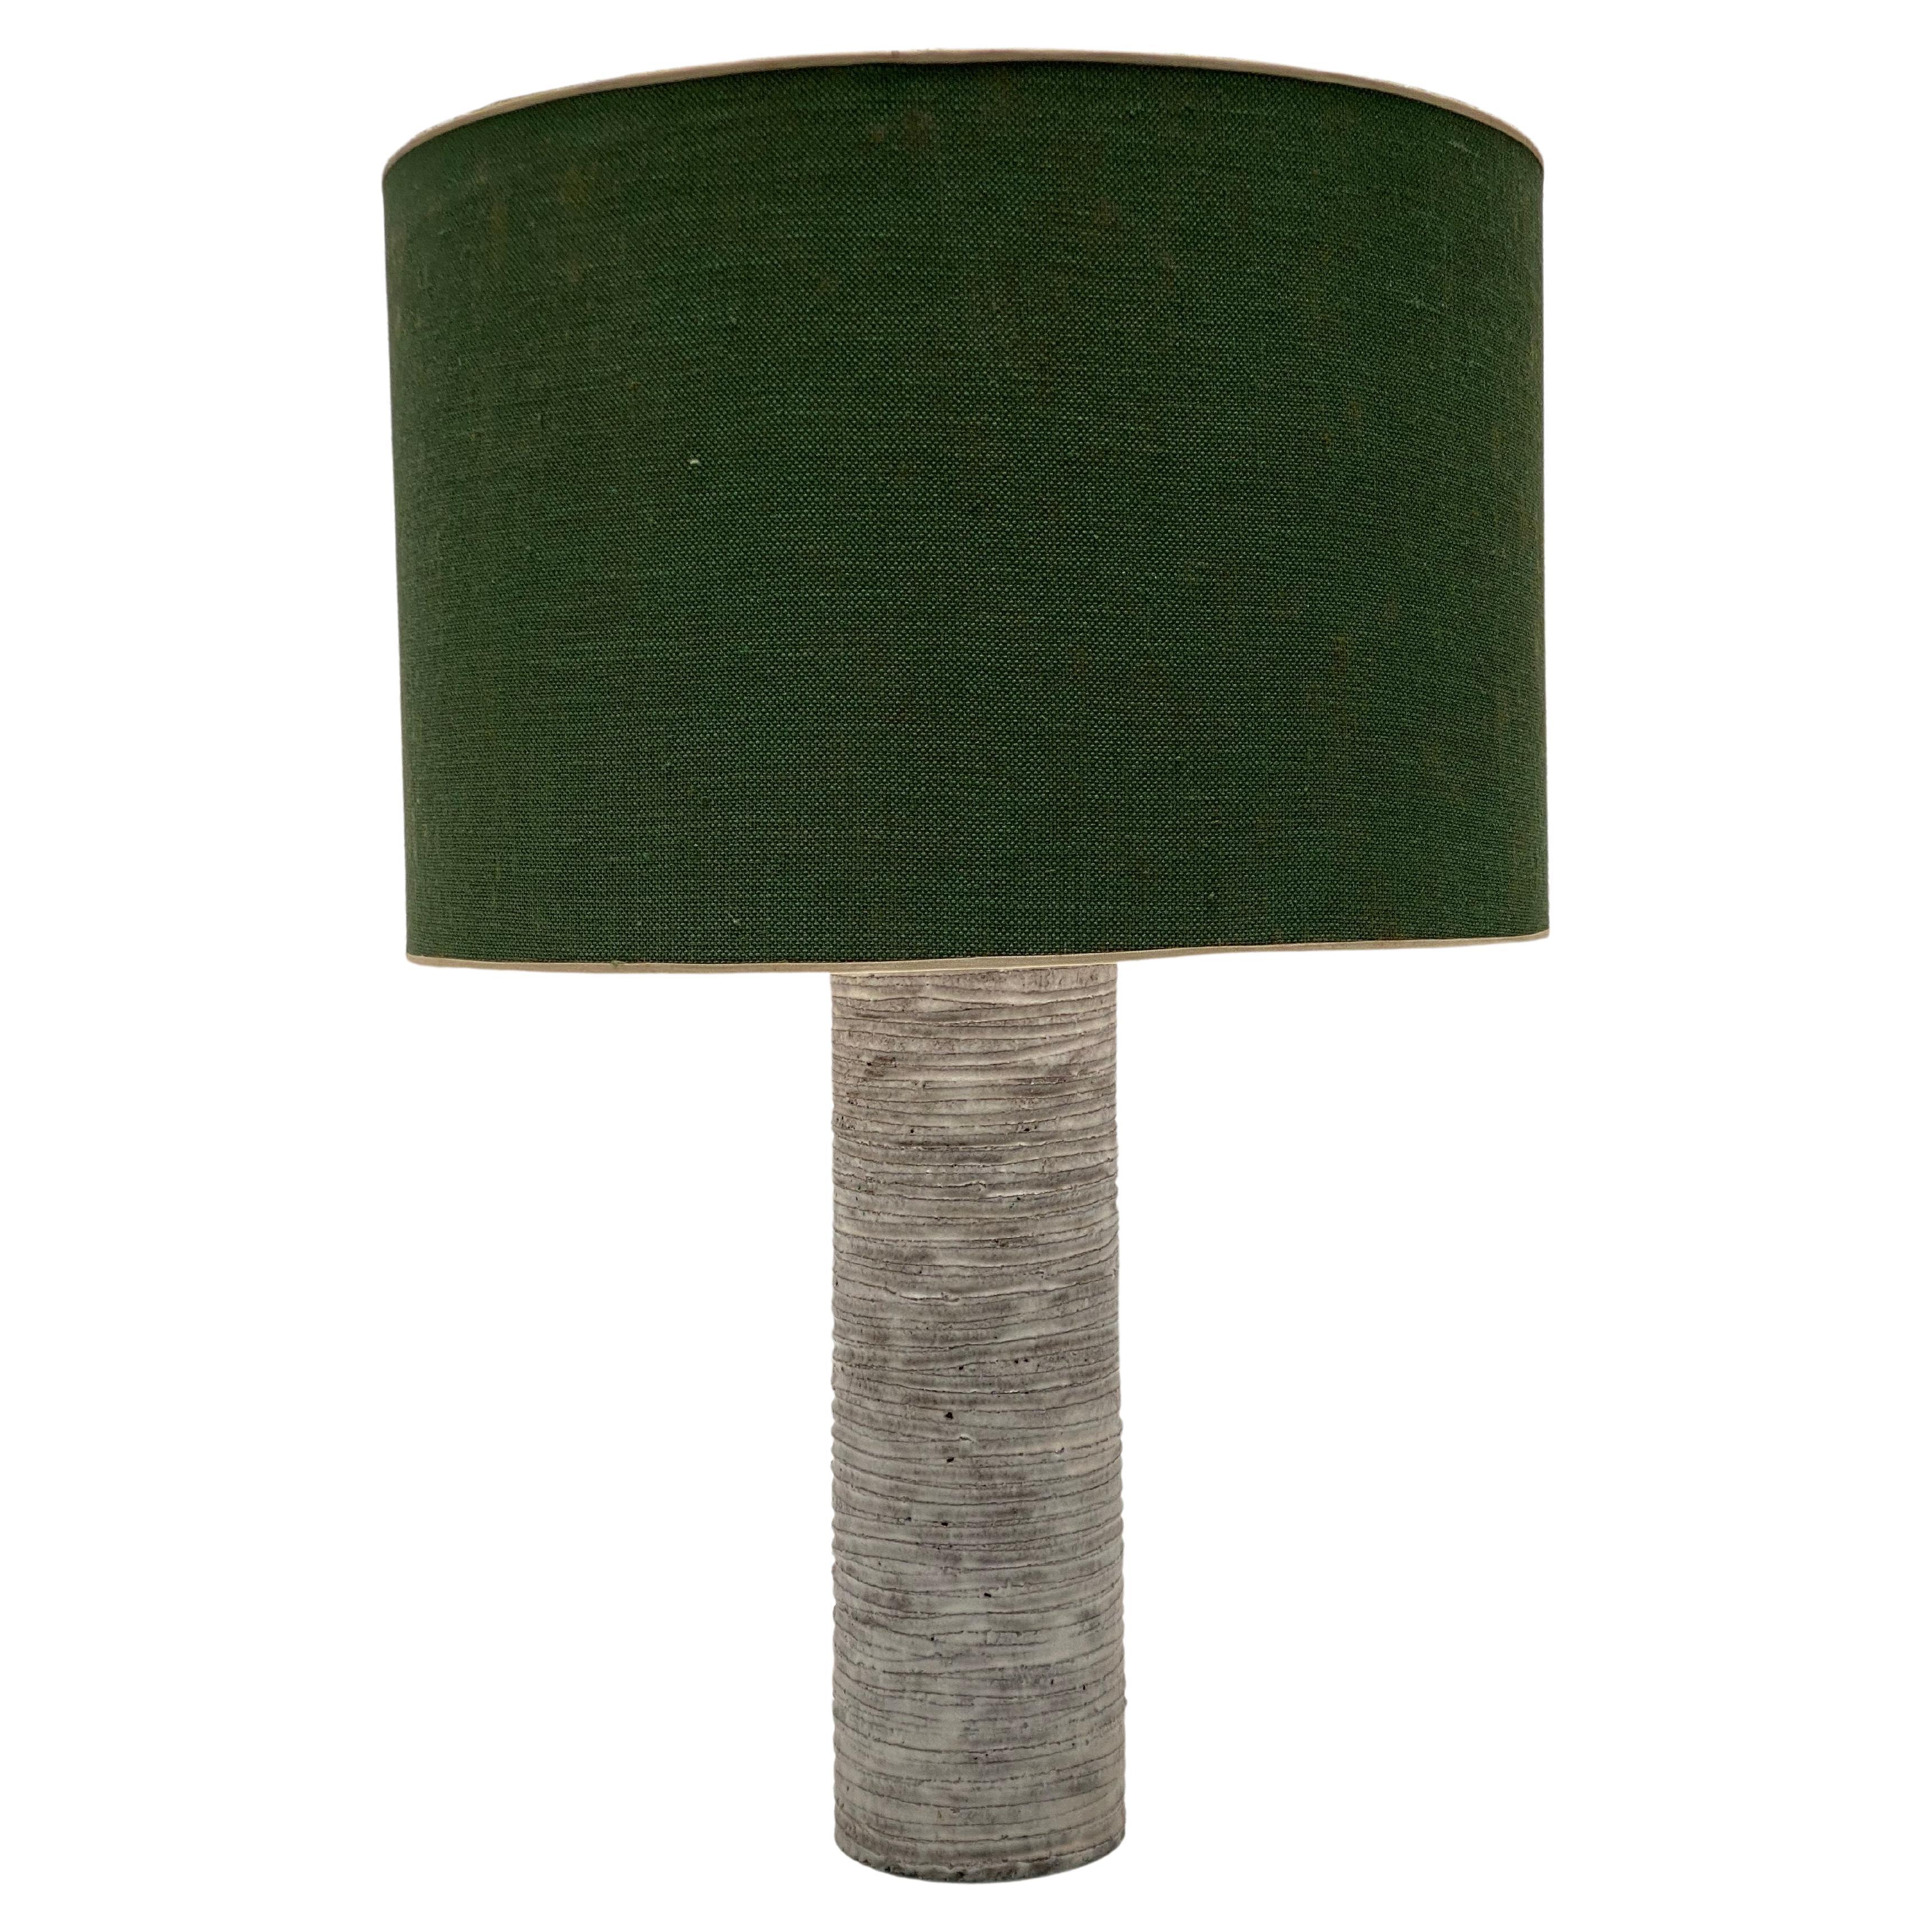 Mid-Century Modern Ceramic Table Lamp with Green Shade For Sale